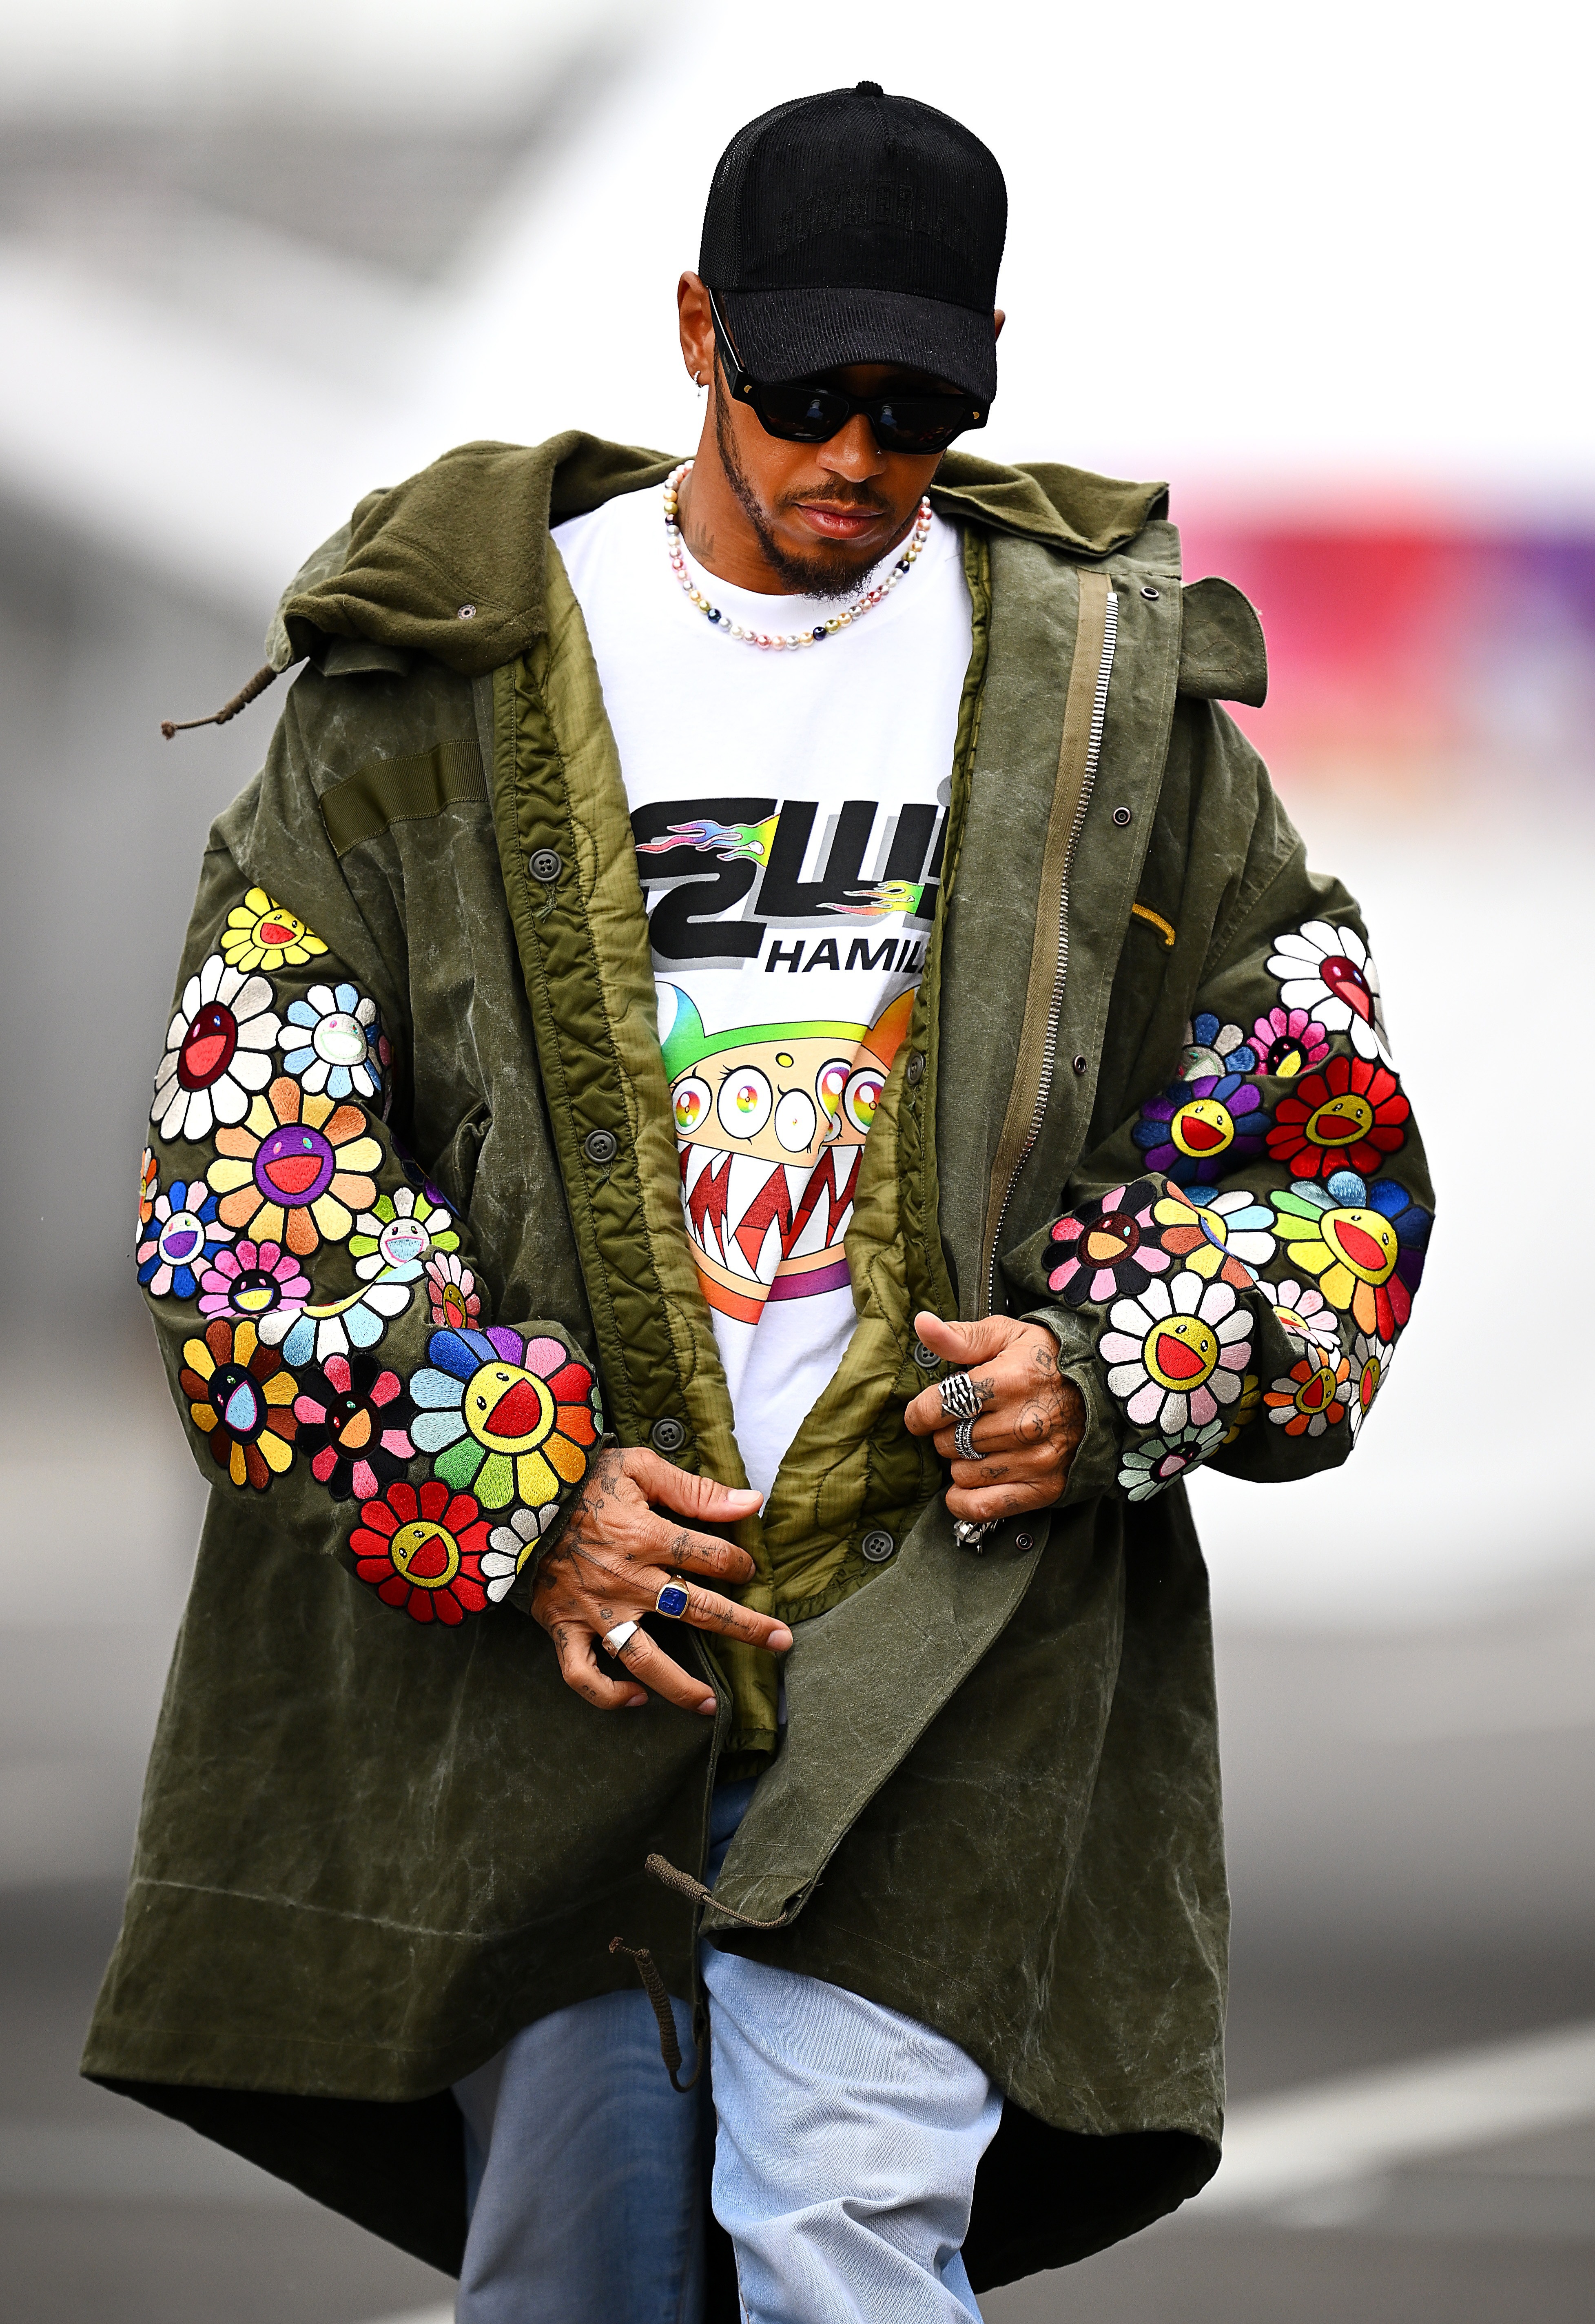 , Lewis Hamilton wears T-shirt with his own name on it and flowery coat as F1 star prepares for Japanese GP